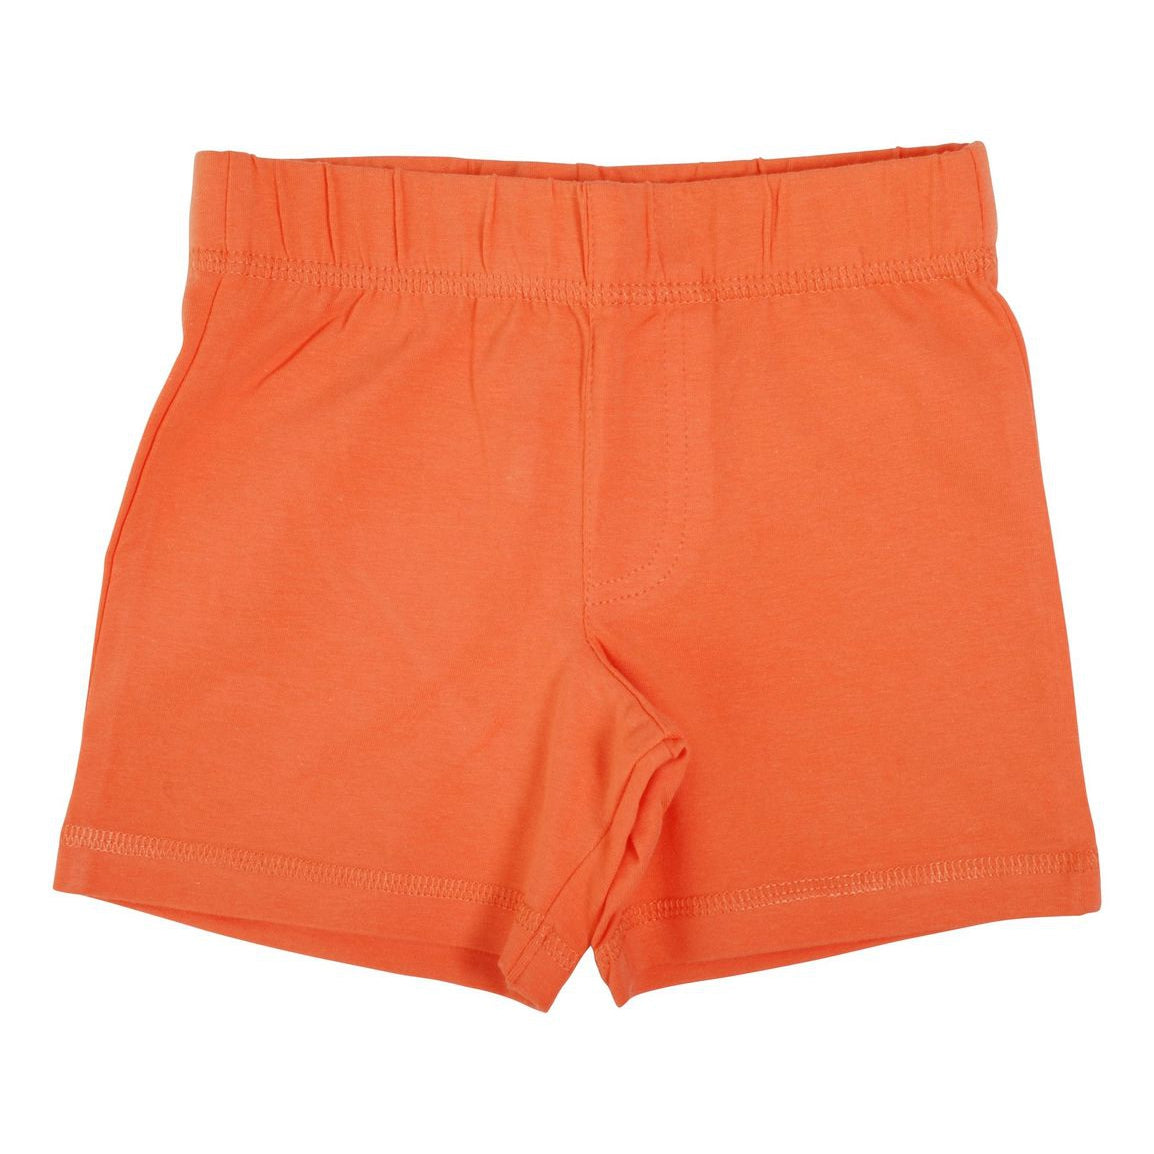 Camelia Shorts - 1 Left Size 12-14 years-More Than A Fling-Modern Rascals